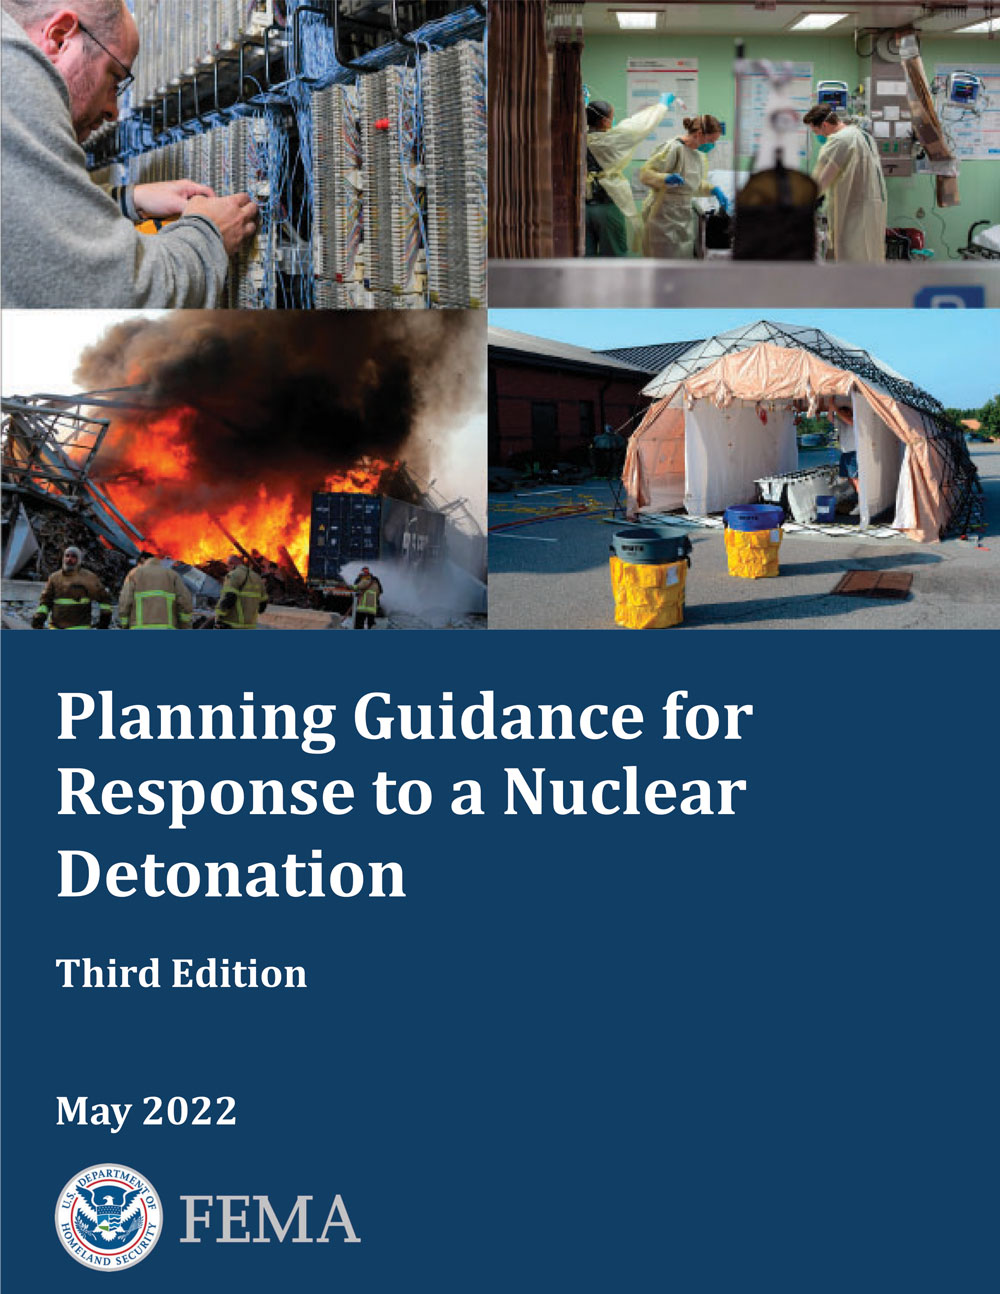 Planning Guidance for Response to a Nuclear Detonation, report cover